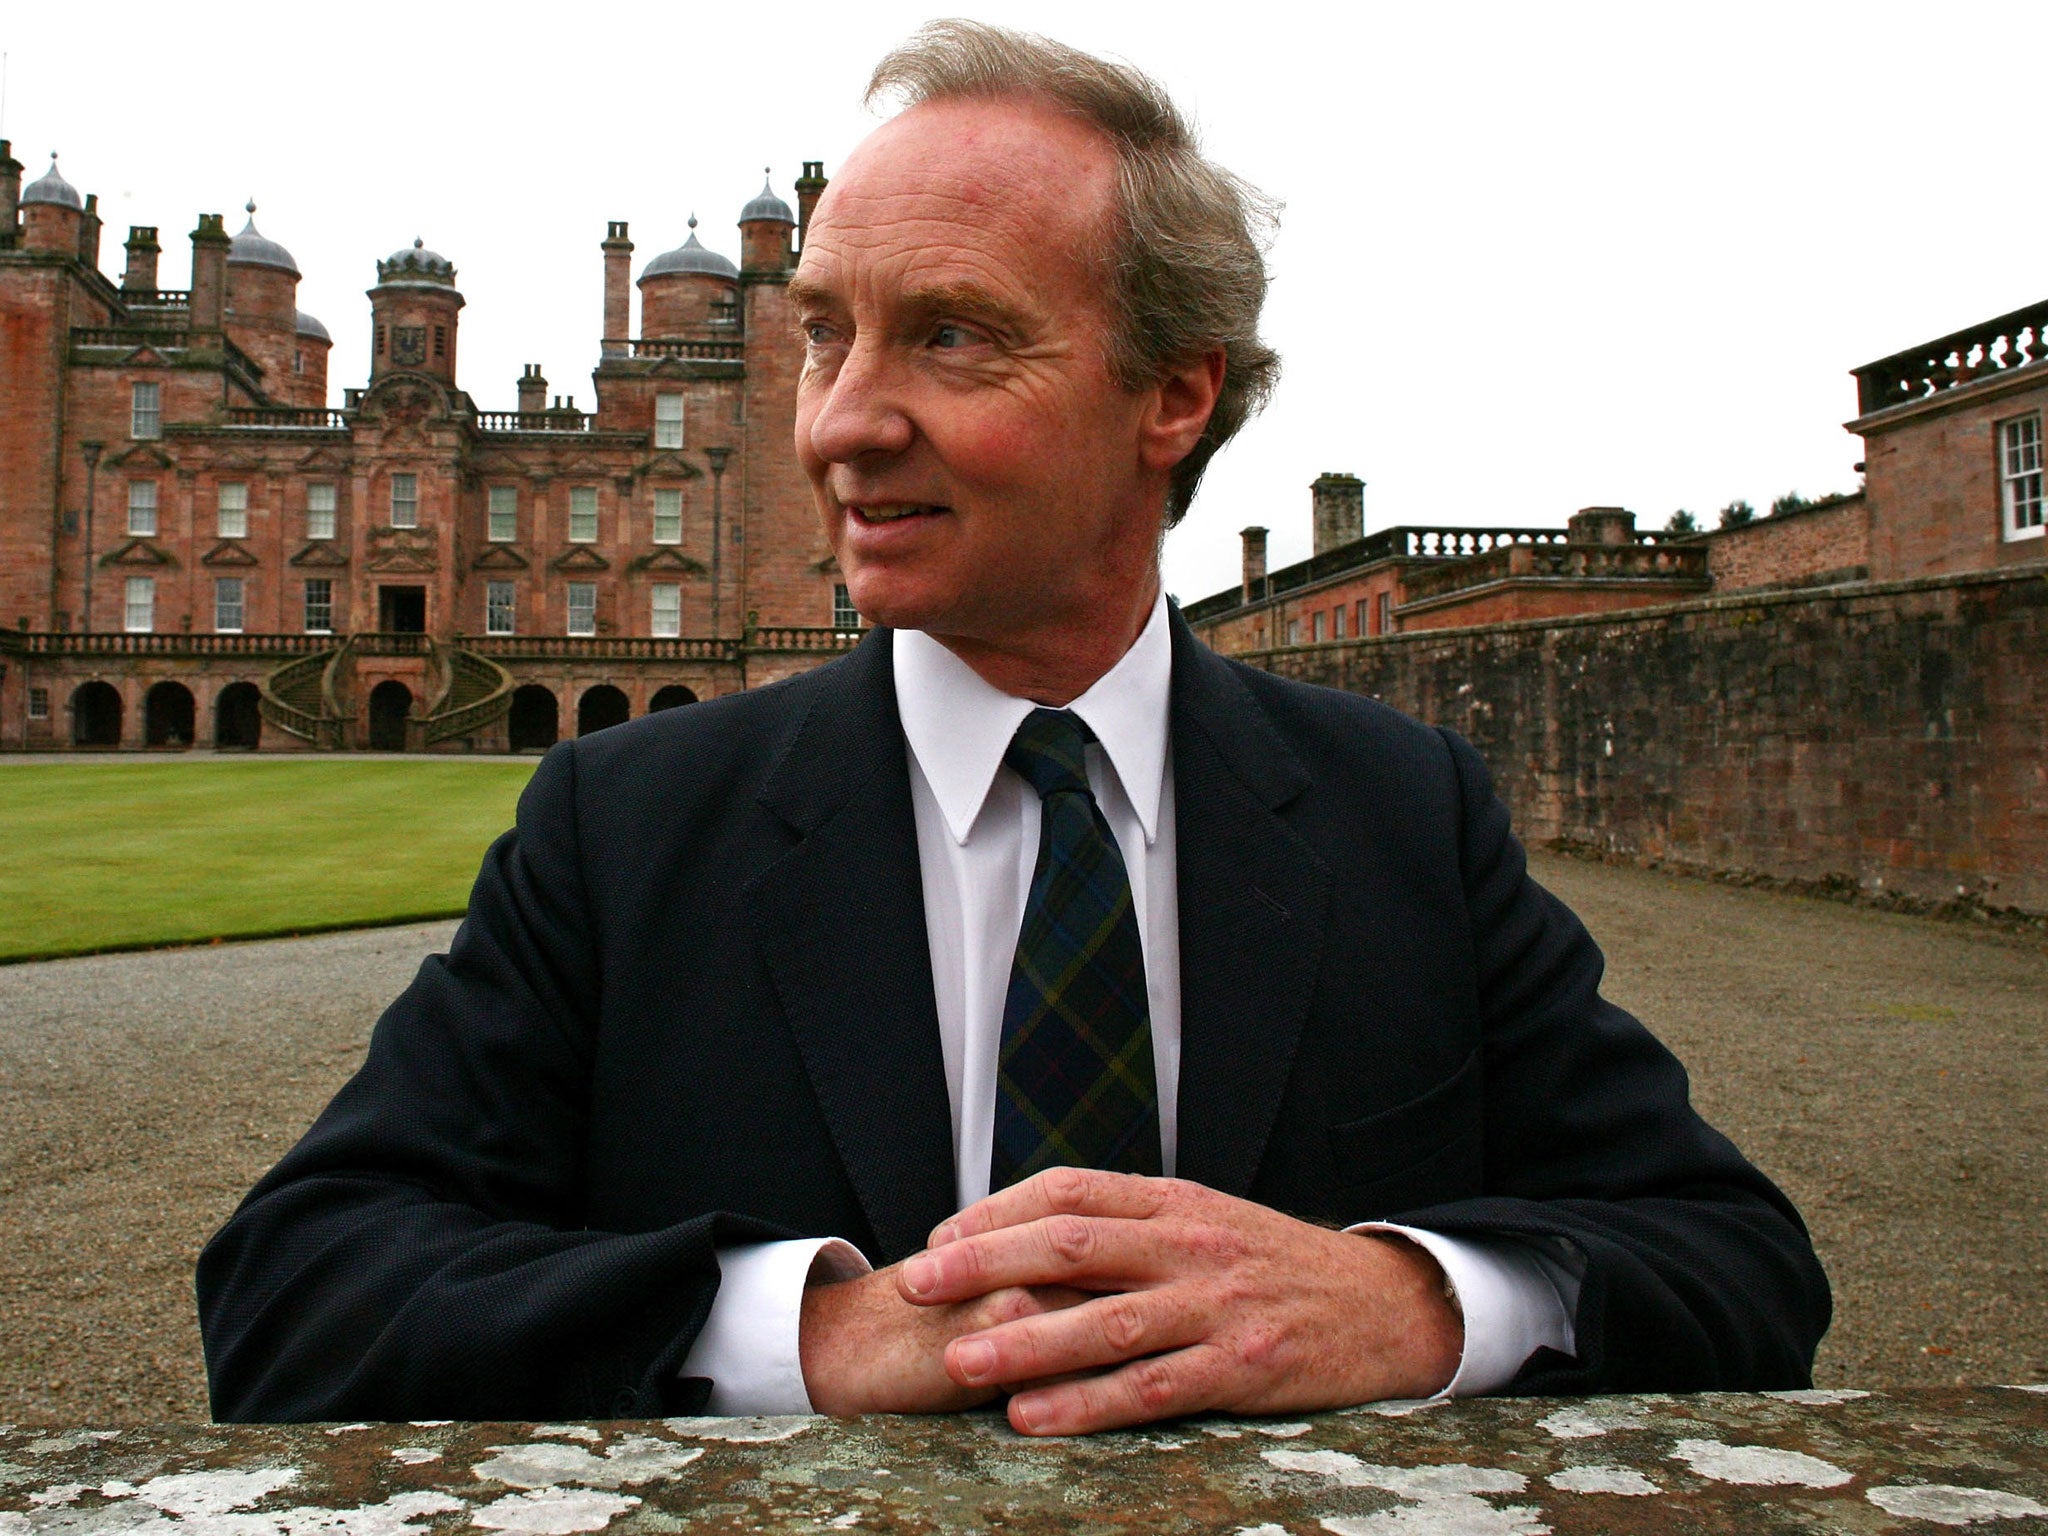 The Duke of Buccleuch is Europe's largest landowner with holdings valued at more than ?1bn